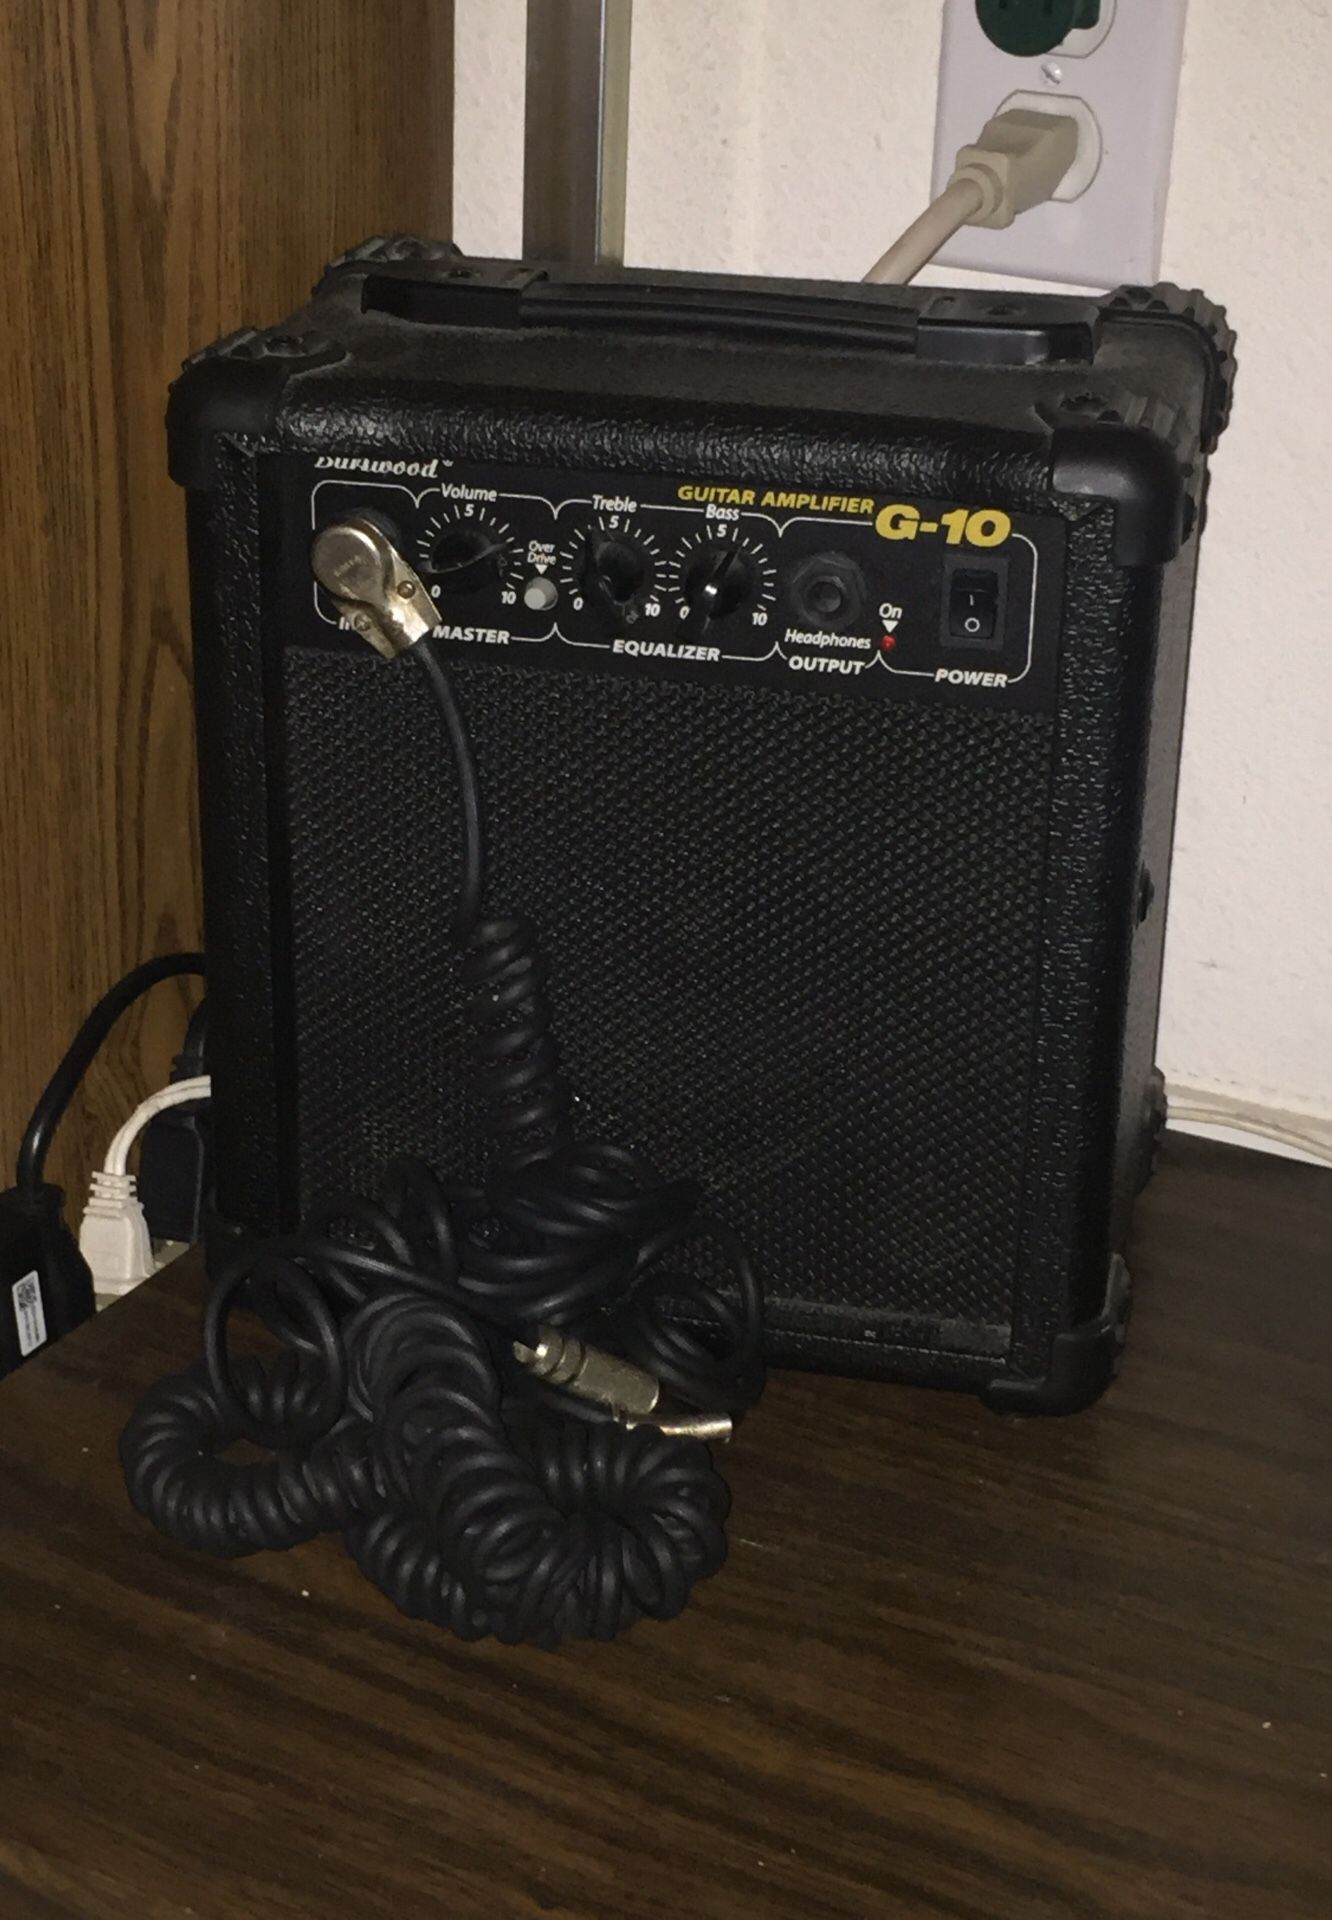 Guitar amp with chord